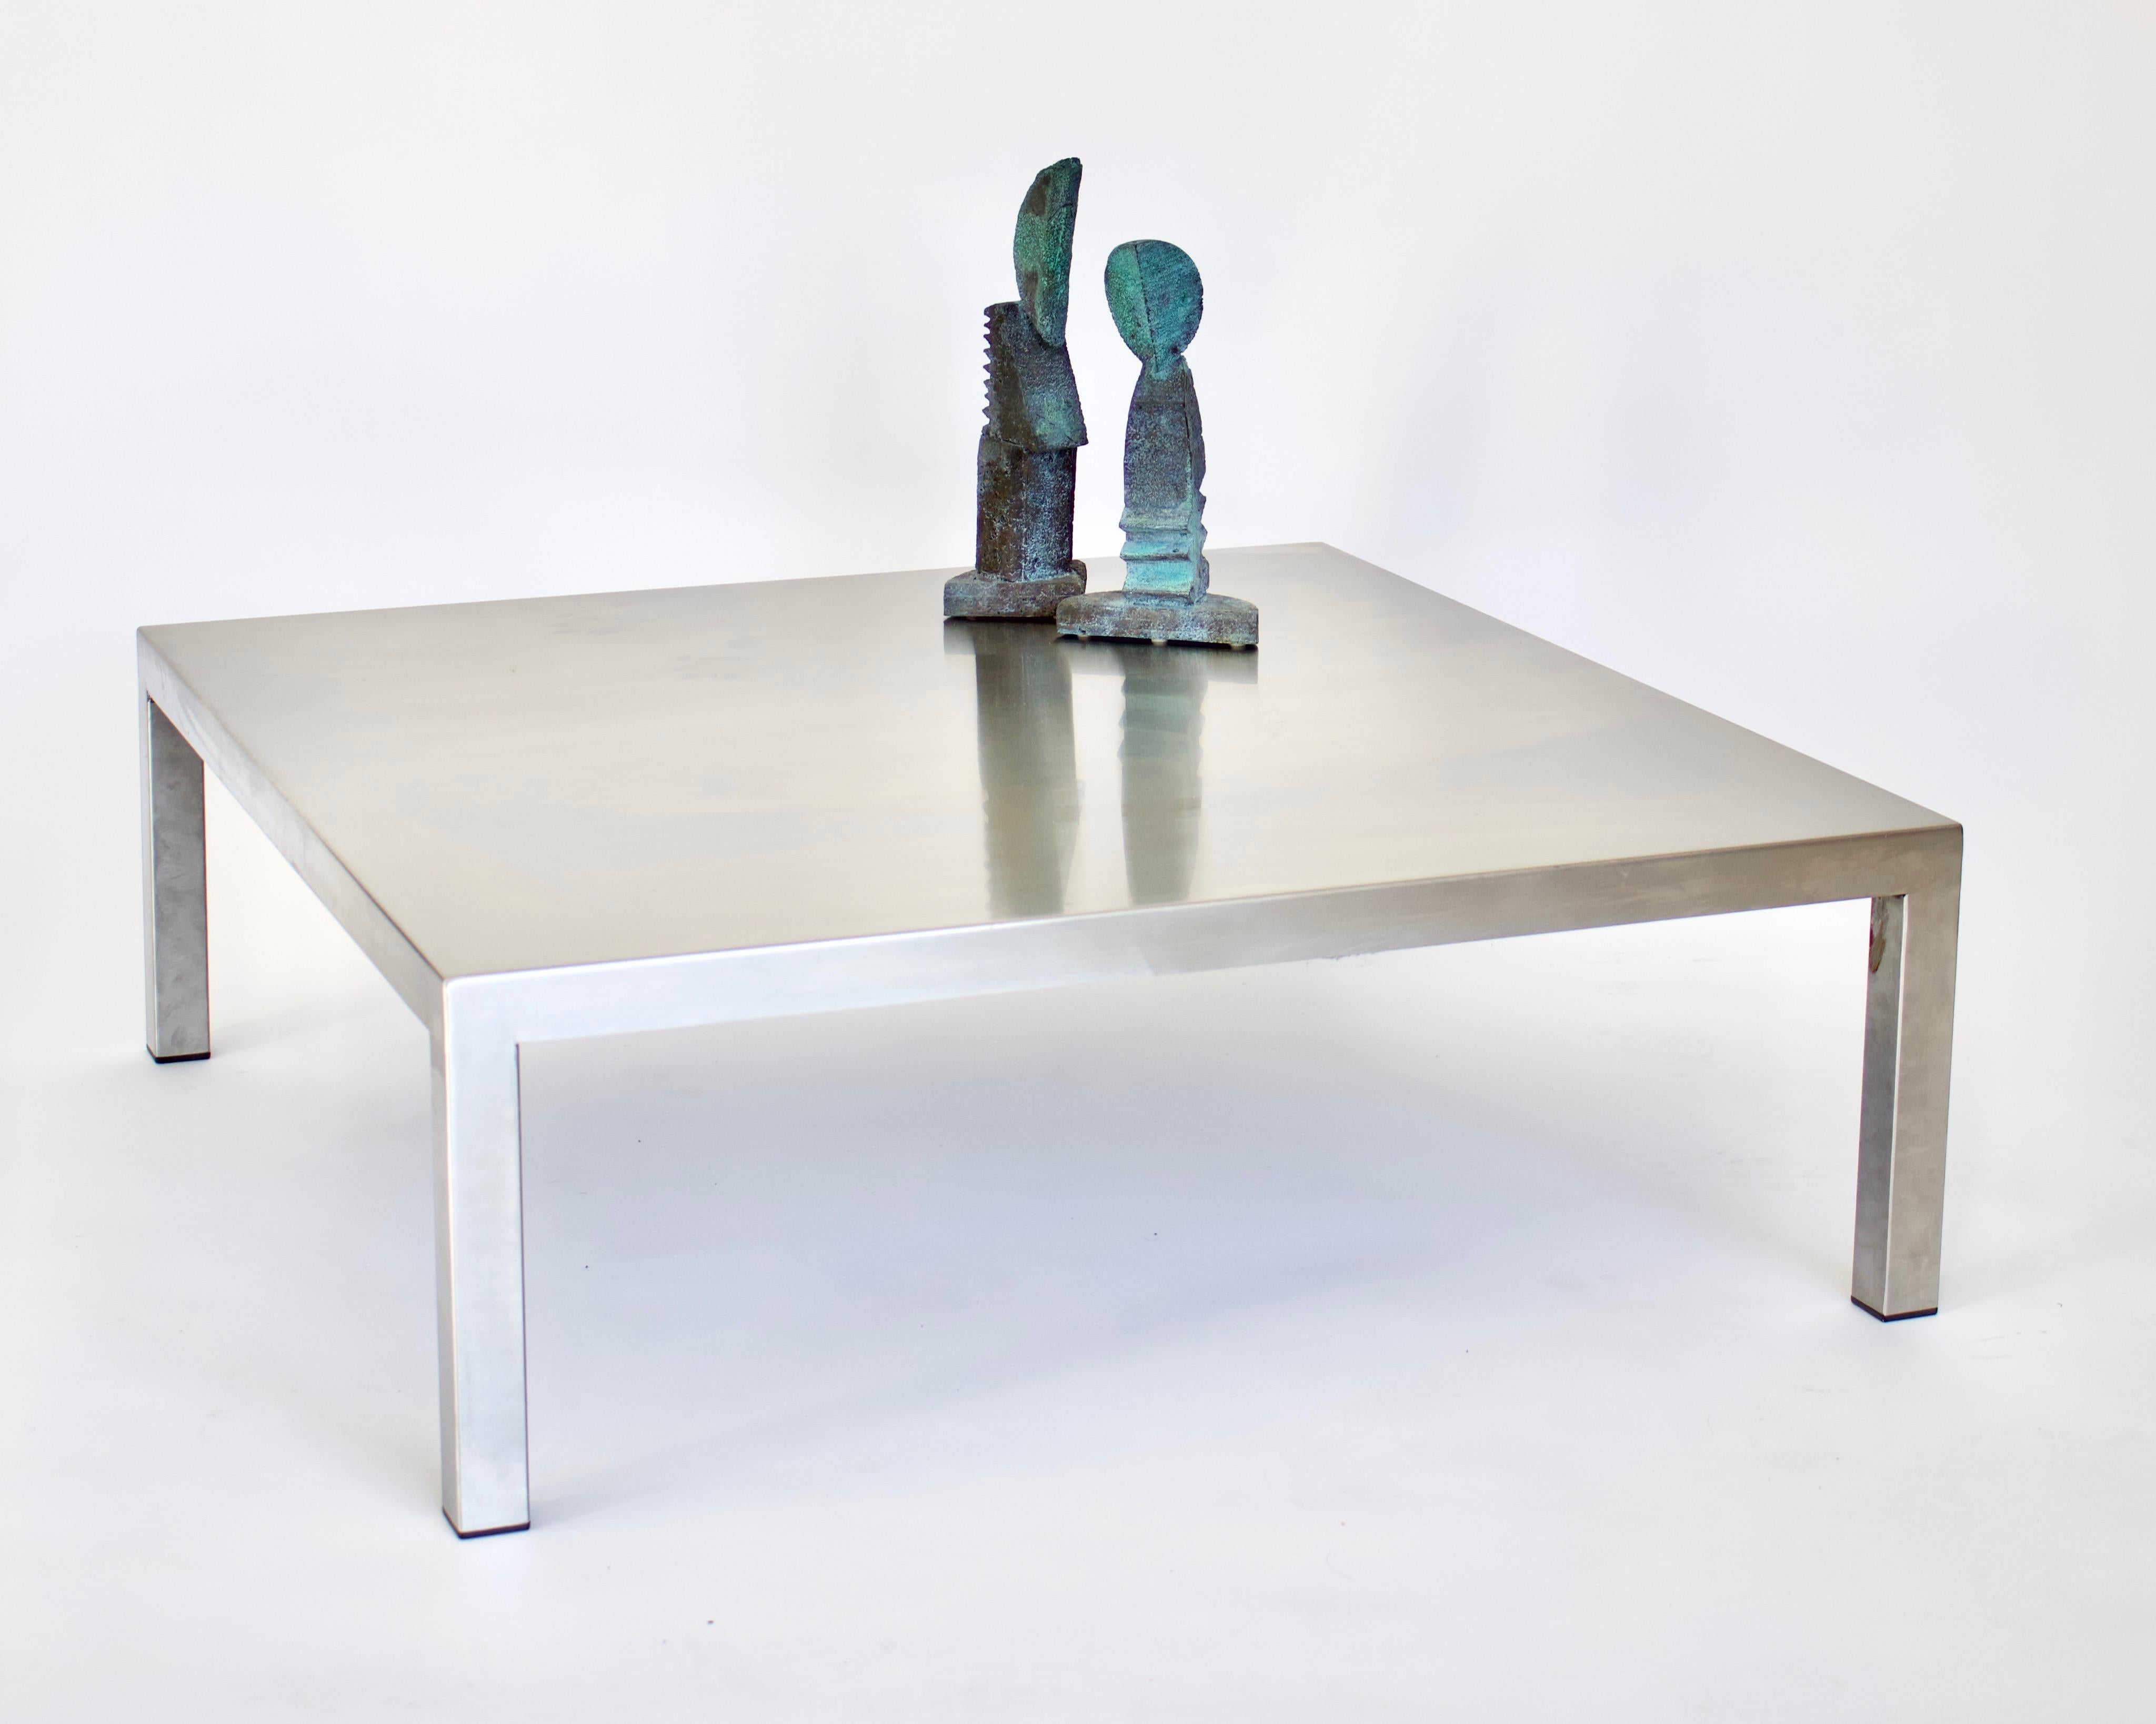 Maria Pergay Square French Stainless Steel Coffee Table, circa 1970 For Sale 6